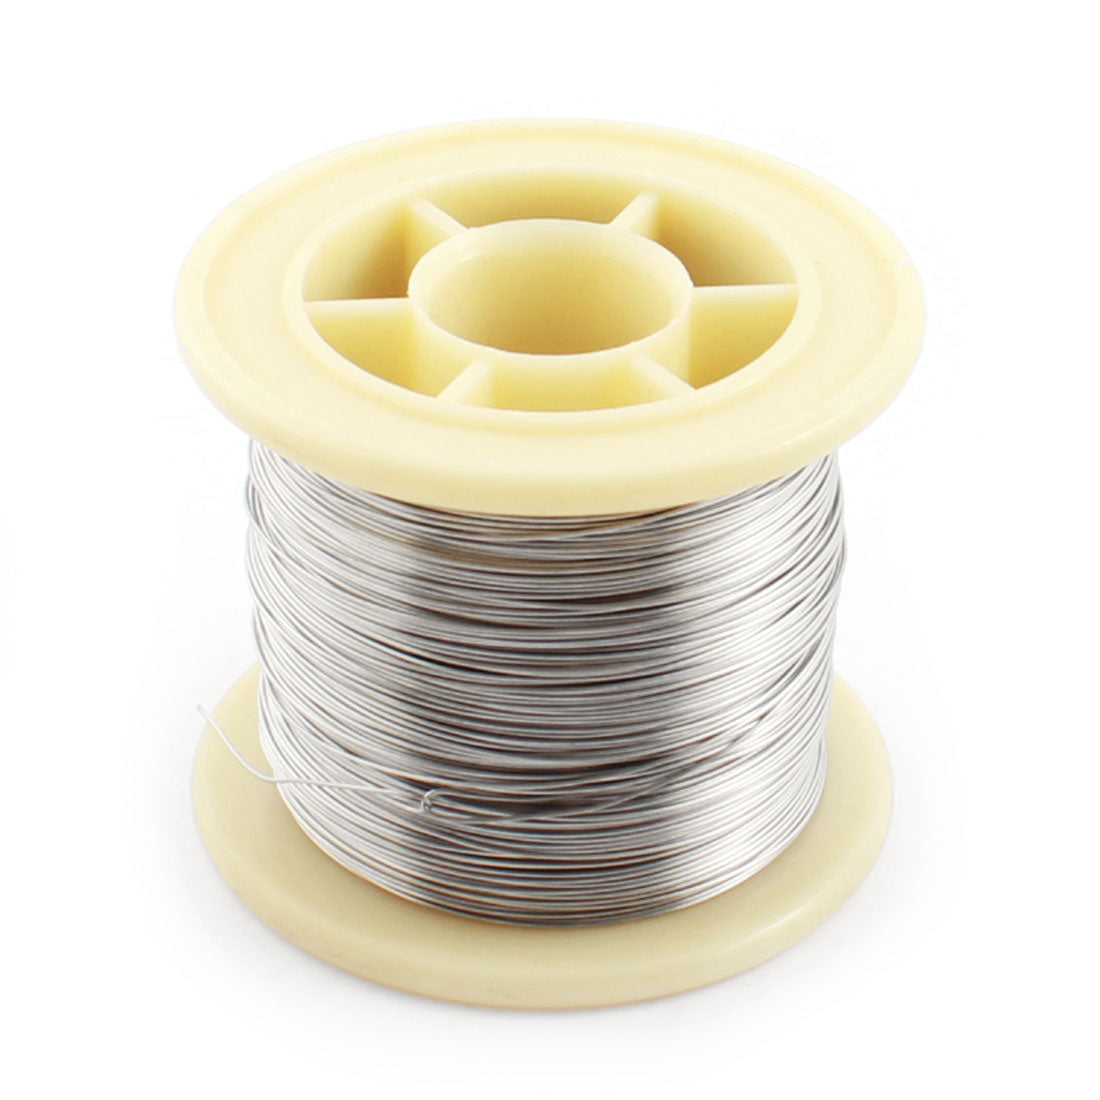 uxcell Uxcell 50meter 165ft Length 0.4mm Diameter AWG26 Resistance Heating Coils Resistor Wire for Heater